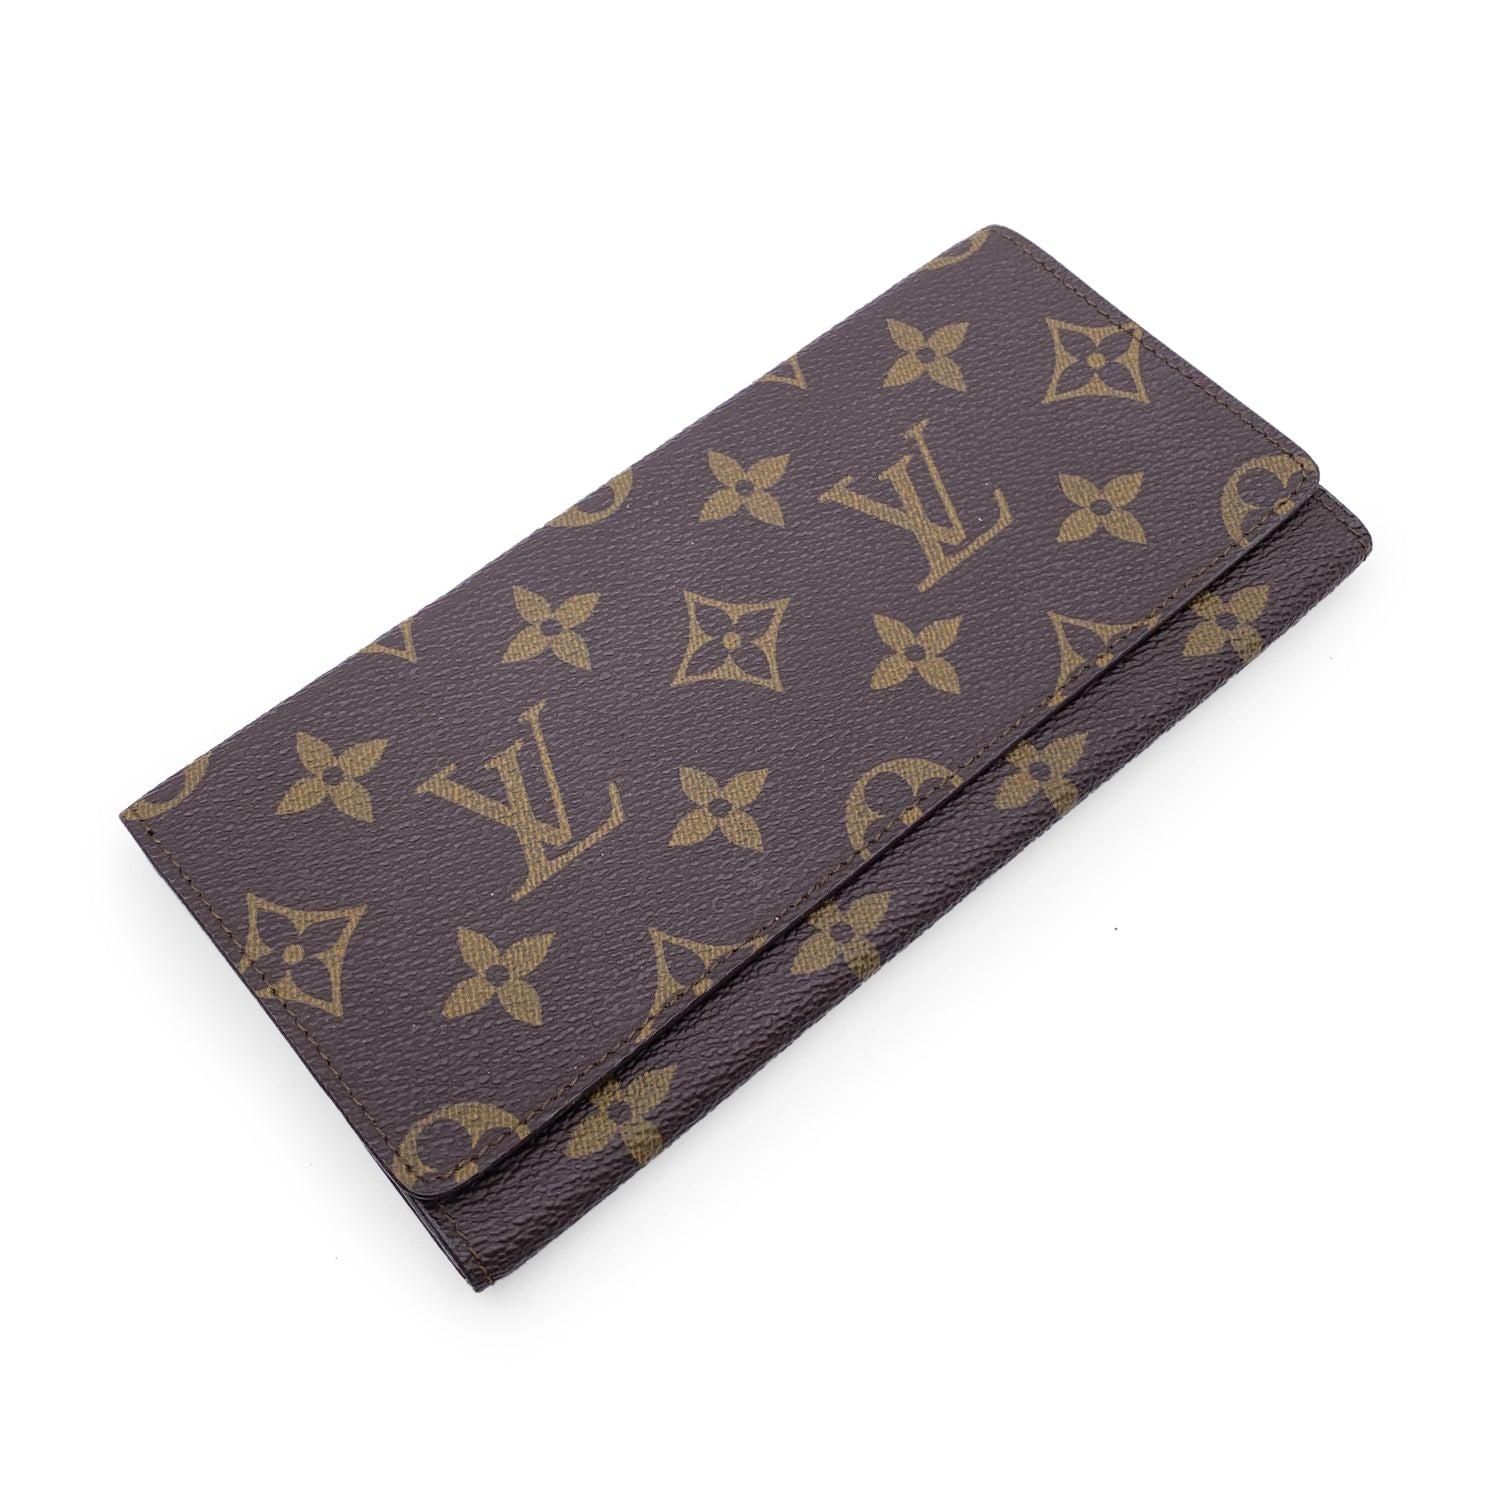 Vintage Louis Vuitton brown monogram canvas Long Bifold Bill Wallet. Flap closure. Leather lining. 1 main compartments inside. 1 open pocket under the flap. 'LOUIS VUITTON Paris - made in France' engraved inside. Details MATERIAL: Cloth COLOR: Brown